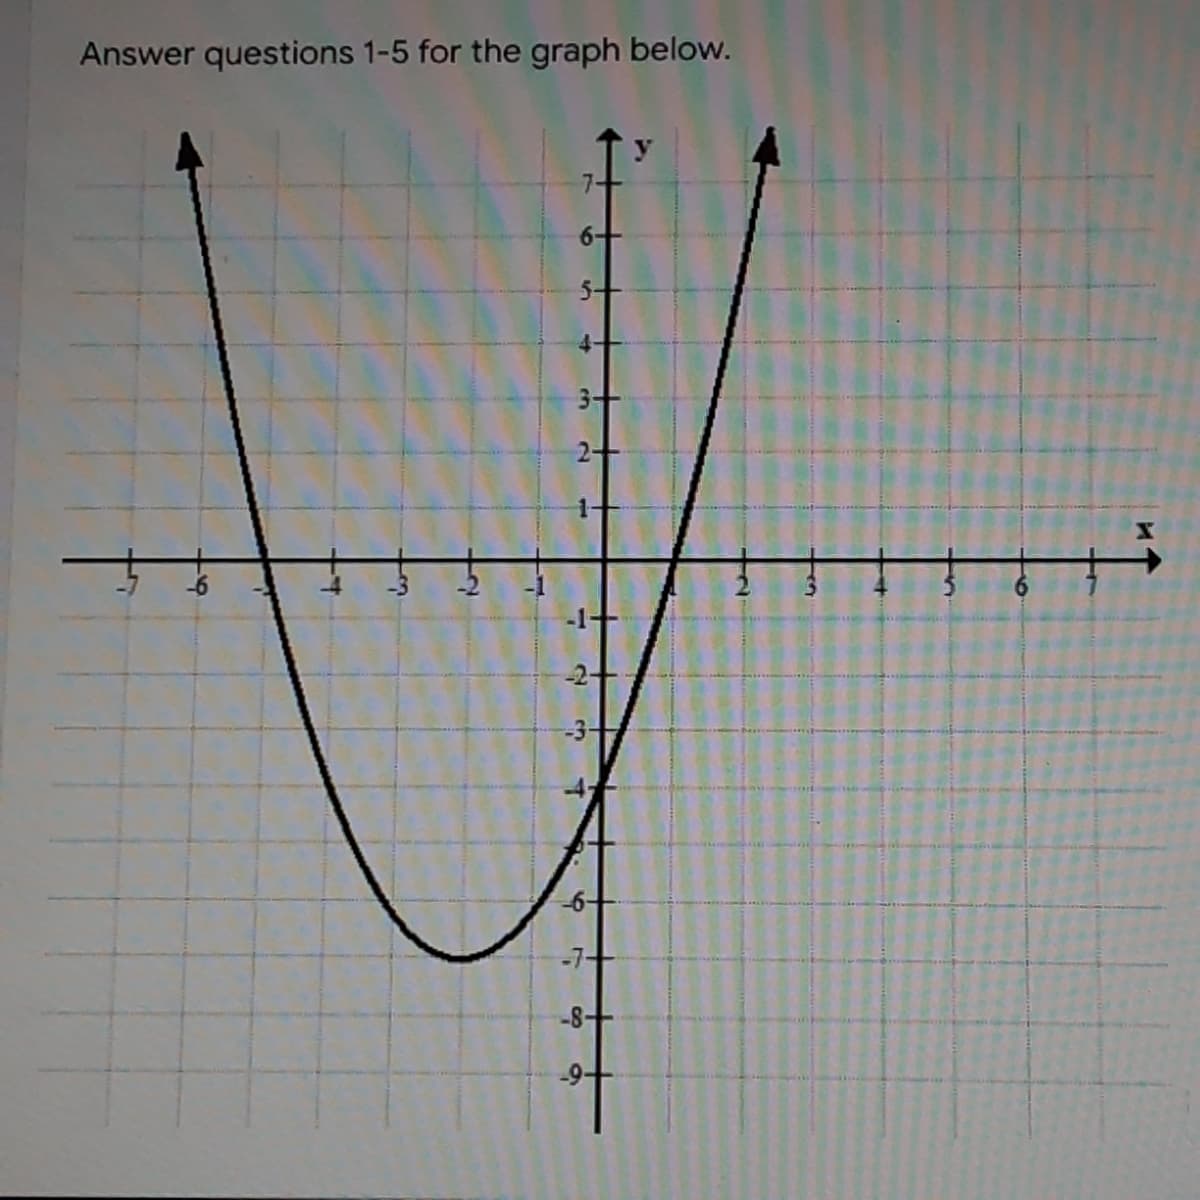 Answer questions 1-5 for the graph below.
6+
5+
4.
2-
-2+
-7-+
-8+
-9-
